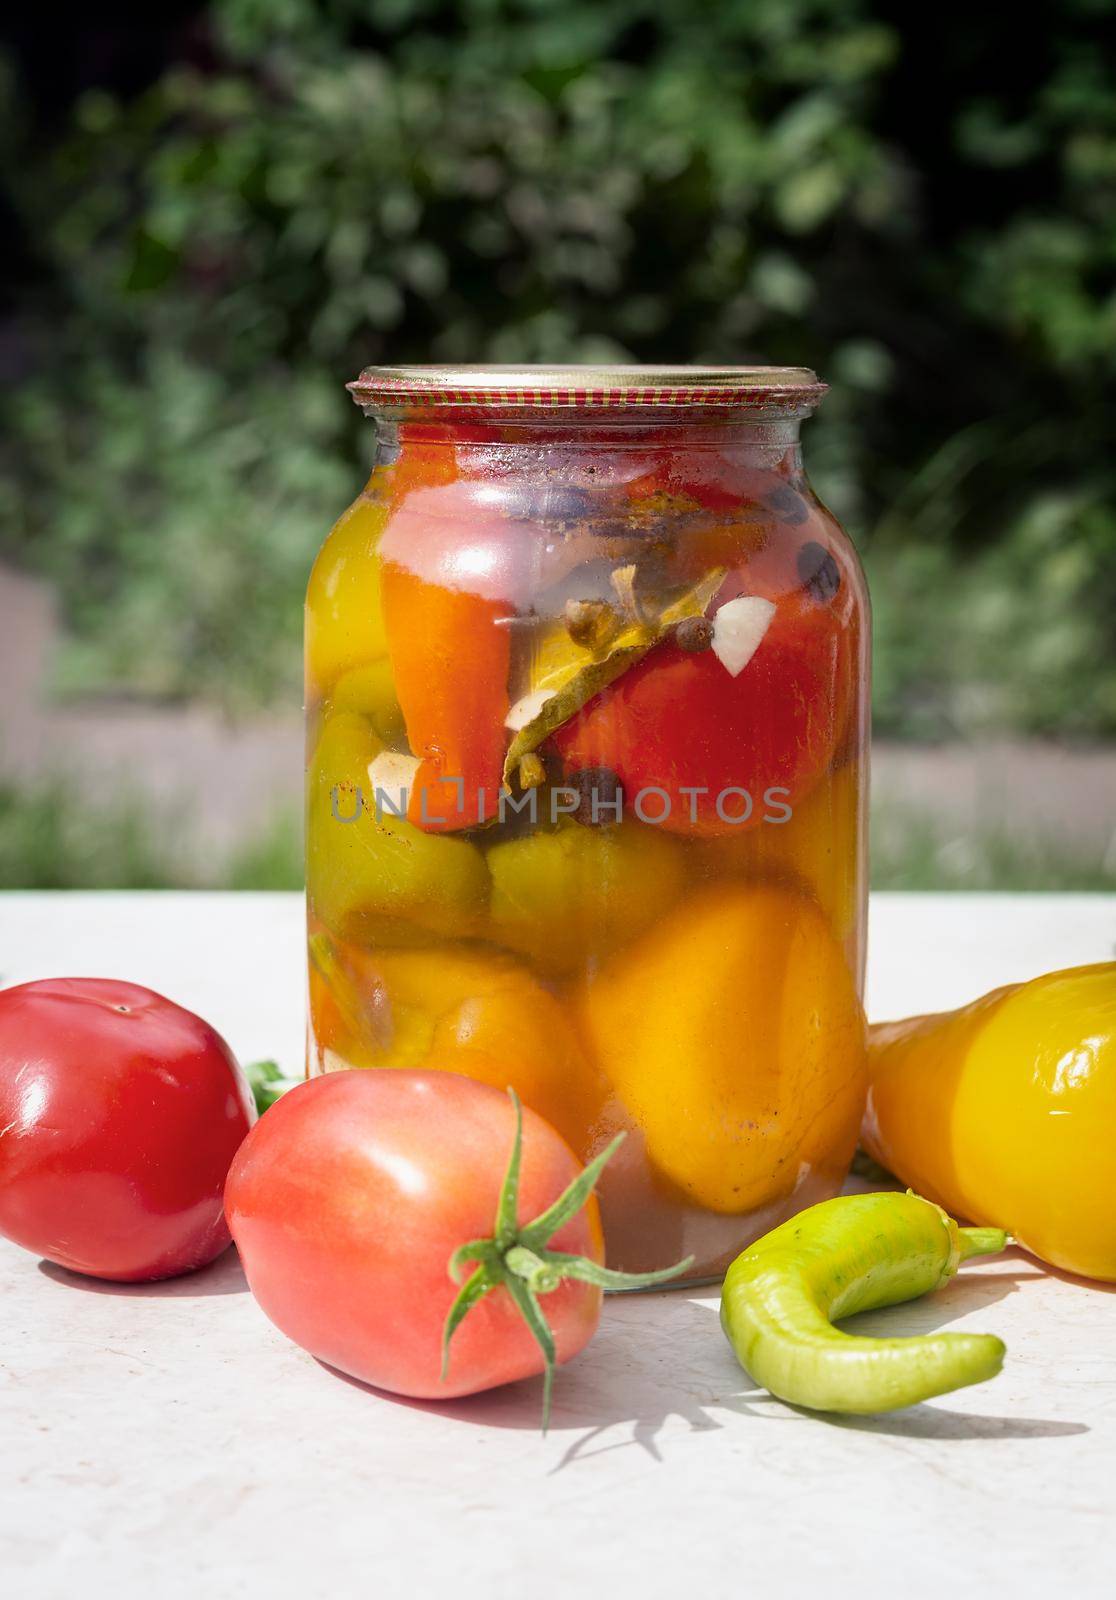 Canned pepper in a glass jar on the table by georgina198